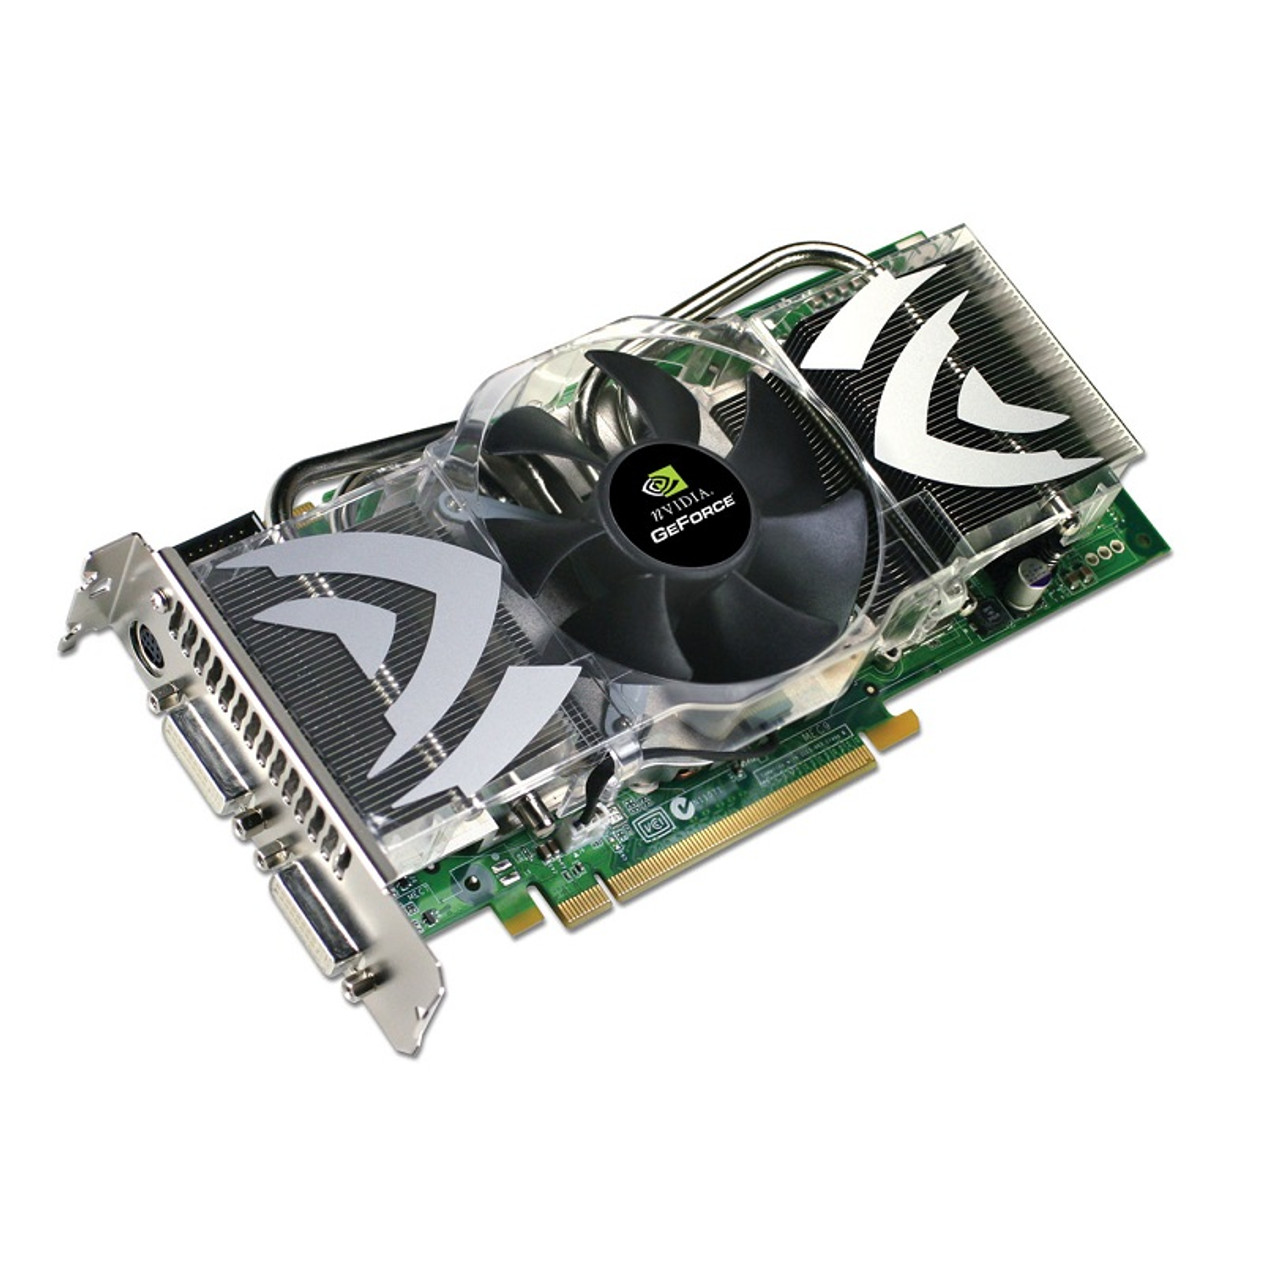 631077-001 - HP Nvidia GeForce GT440 PCI-Express X16 1.5GB Full Height Video Graphics Card